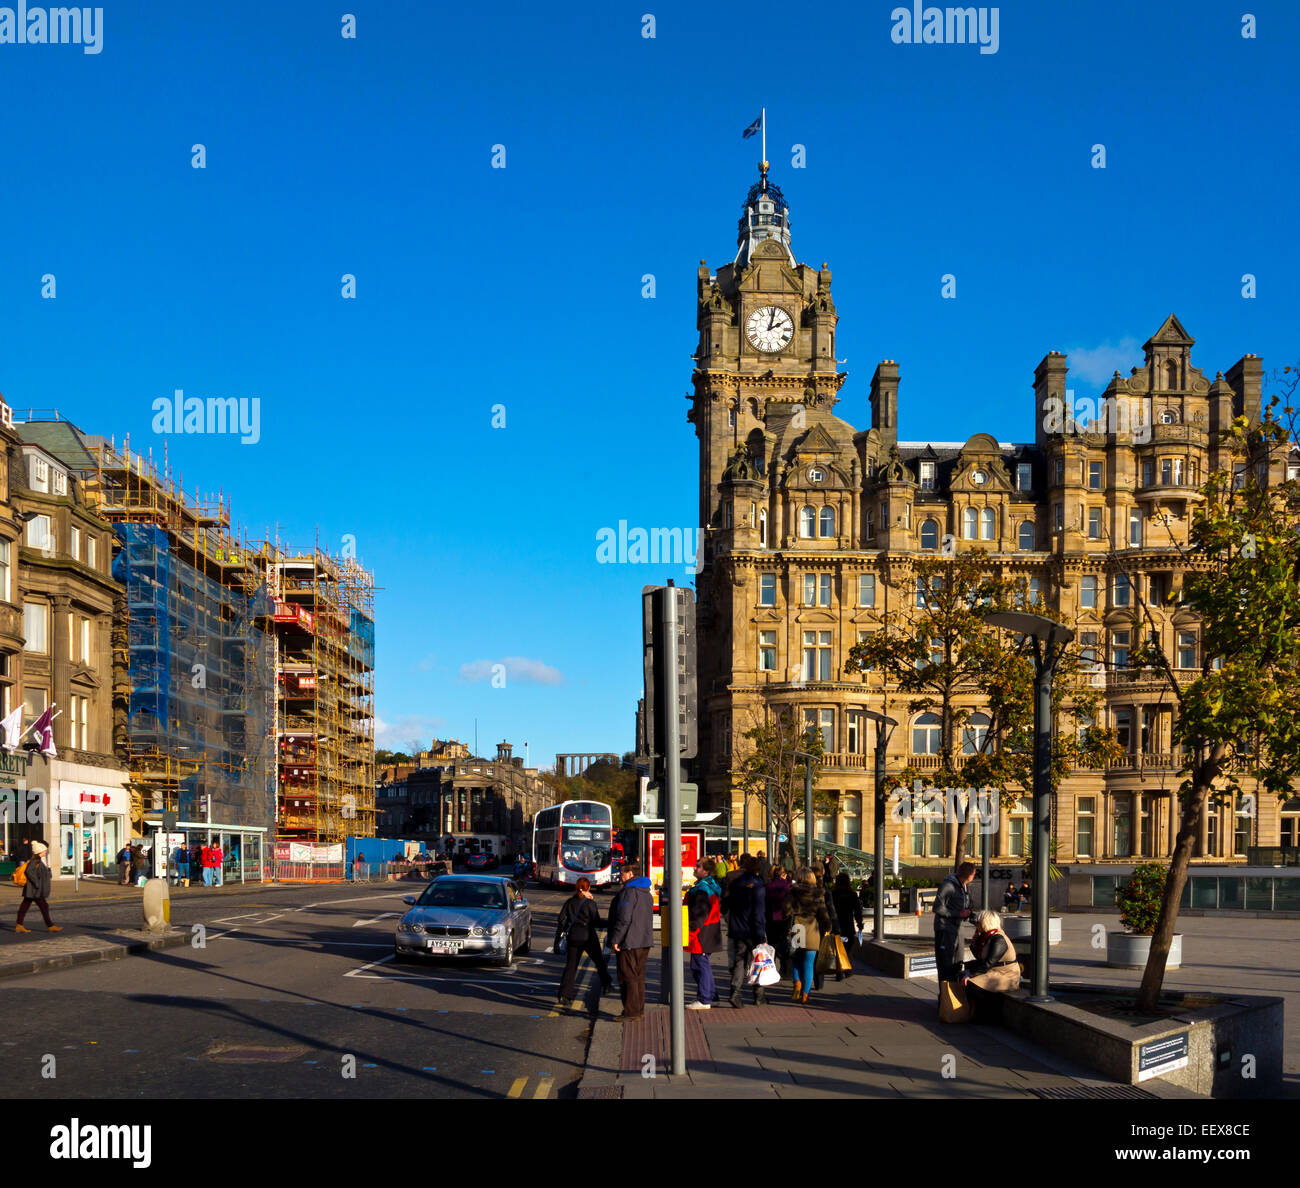 Old Waverley Hotel on Princes Street the main shopping street in Edinburgh city centre Scotland UK with shoppers and pedestrians Stock Photo